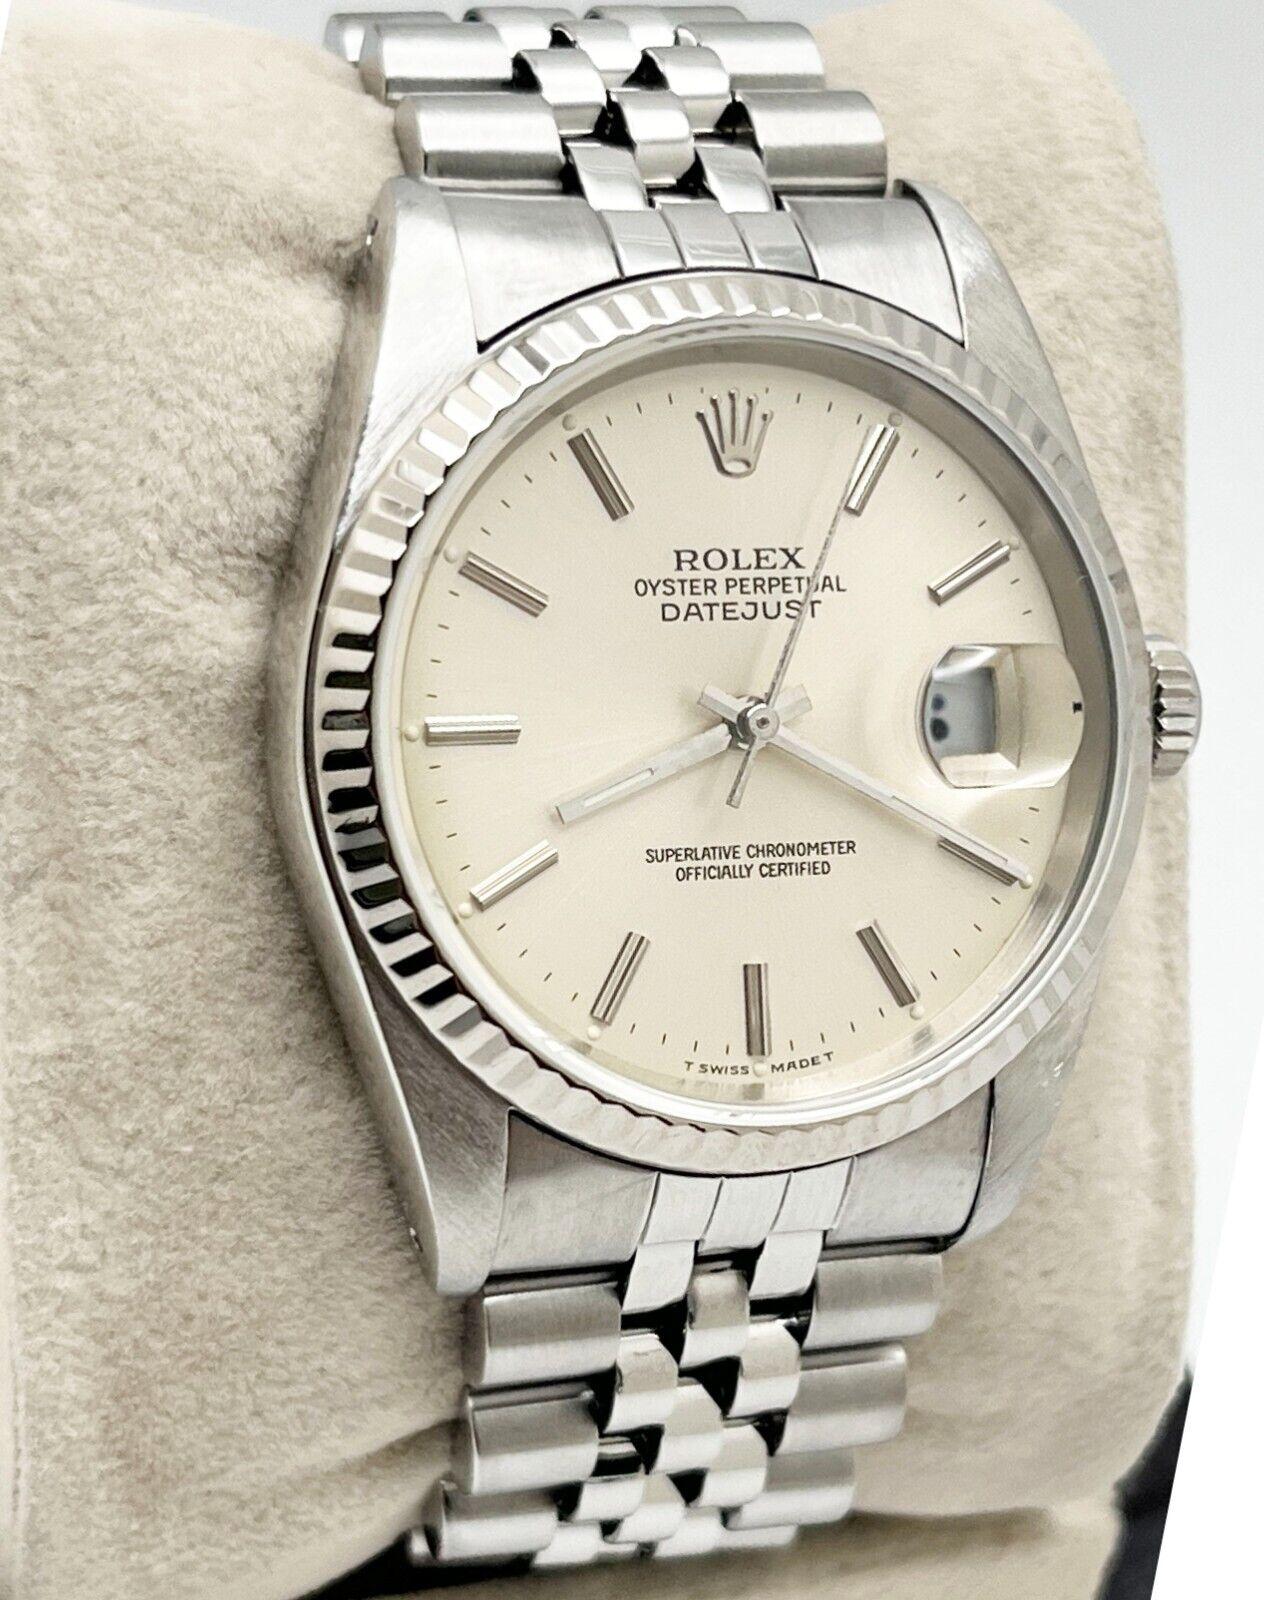 Style Number: 16234

Serial: R555***

Year: 1987

Model: Datejust

Case Material: Stainless Steel

Band: Stainless Steel

Bezel: 18K White Gold 

Dial: Silver

Face: Sapphire Crystal

Case Size: 36mm

Includes: 

-Elegant Watch Box

-Certified